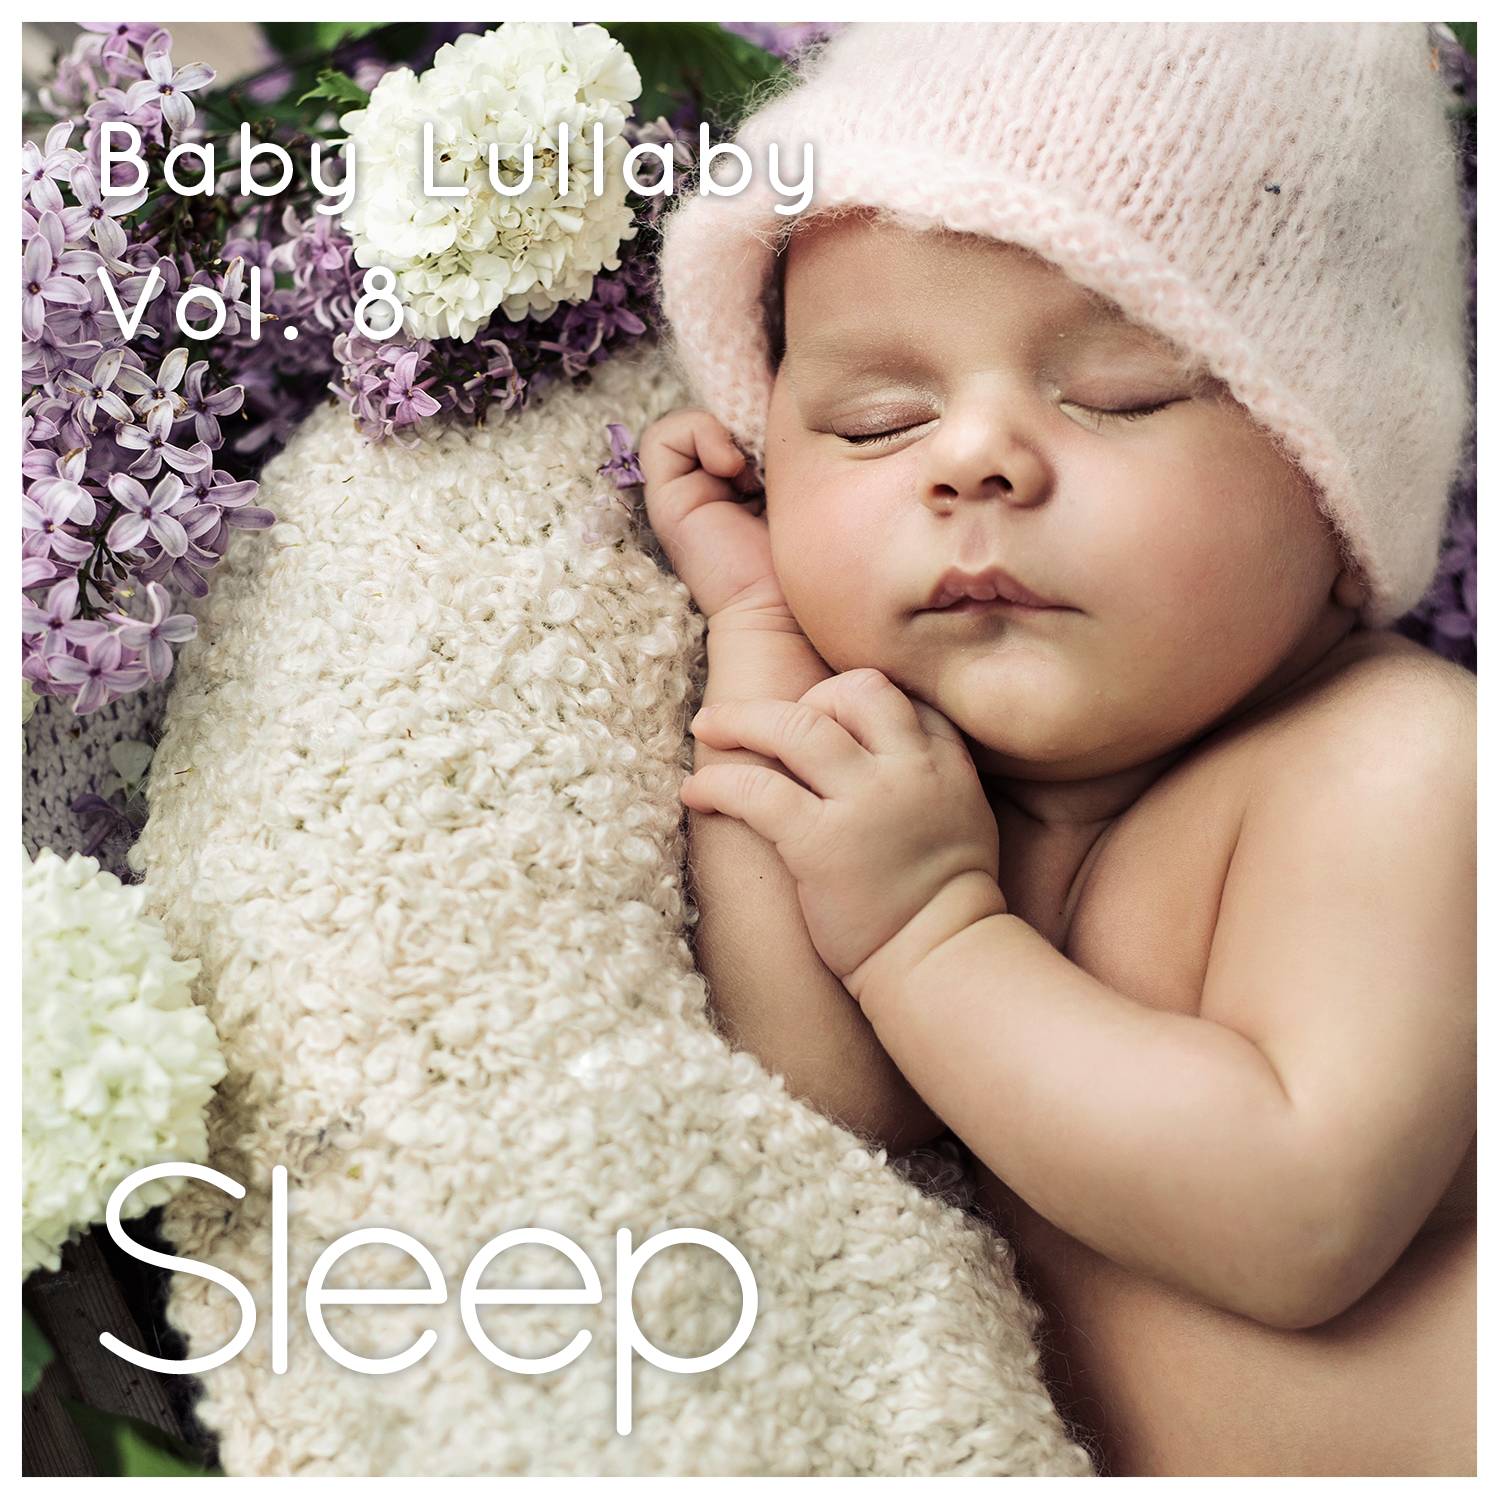 Baby Sleep Ambient Lullaby, Pt. 40